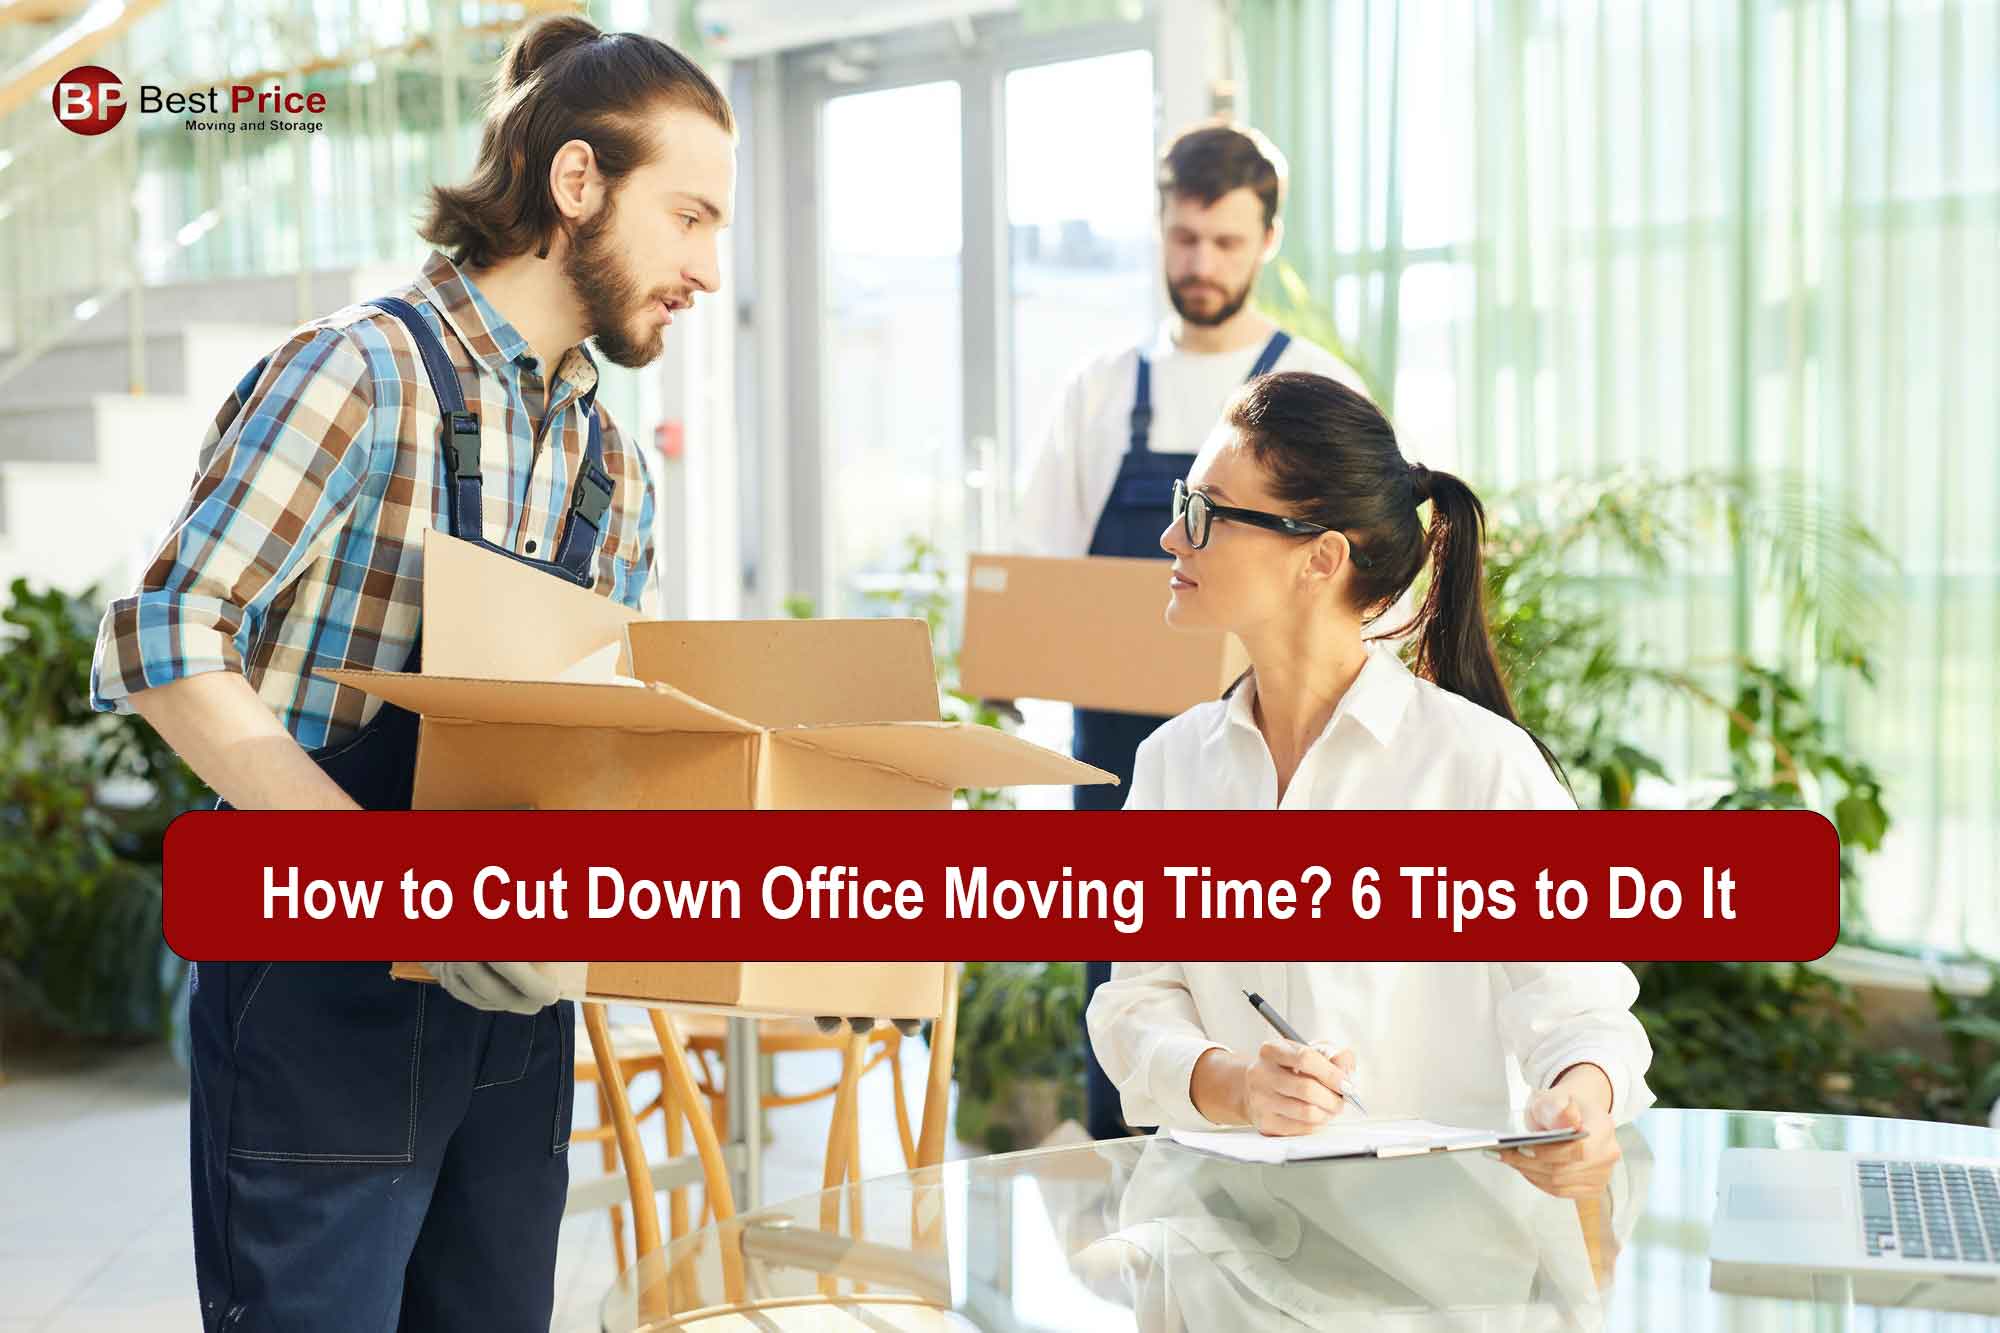 How to Cut Down Office Moving Time? 6 Tips to Do It